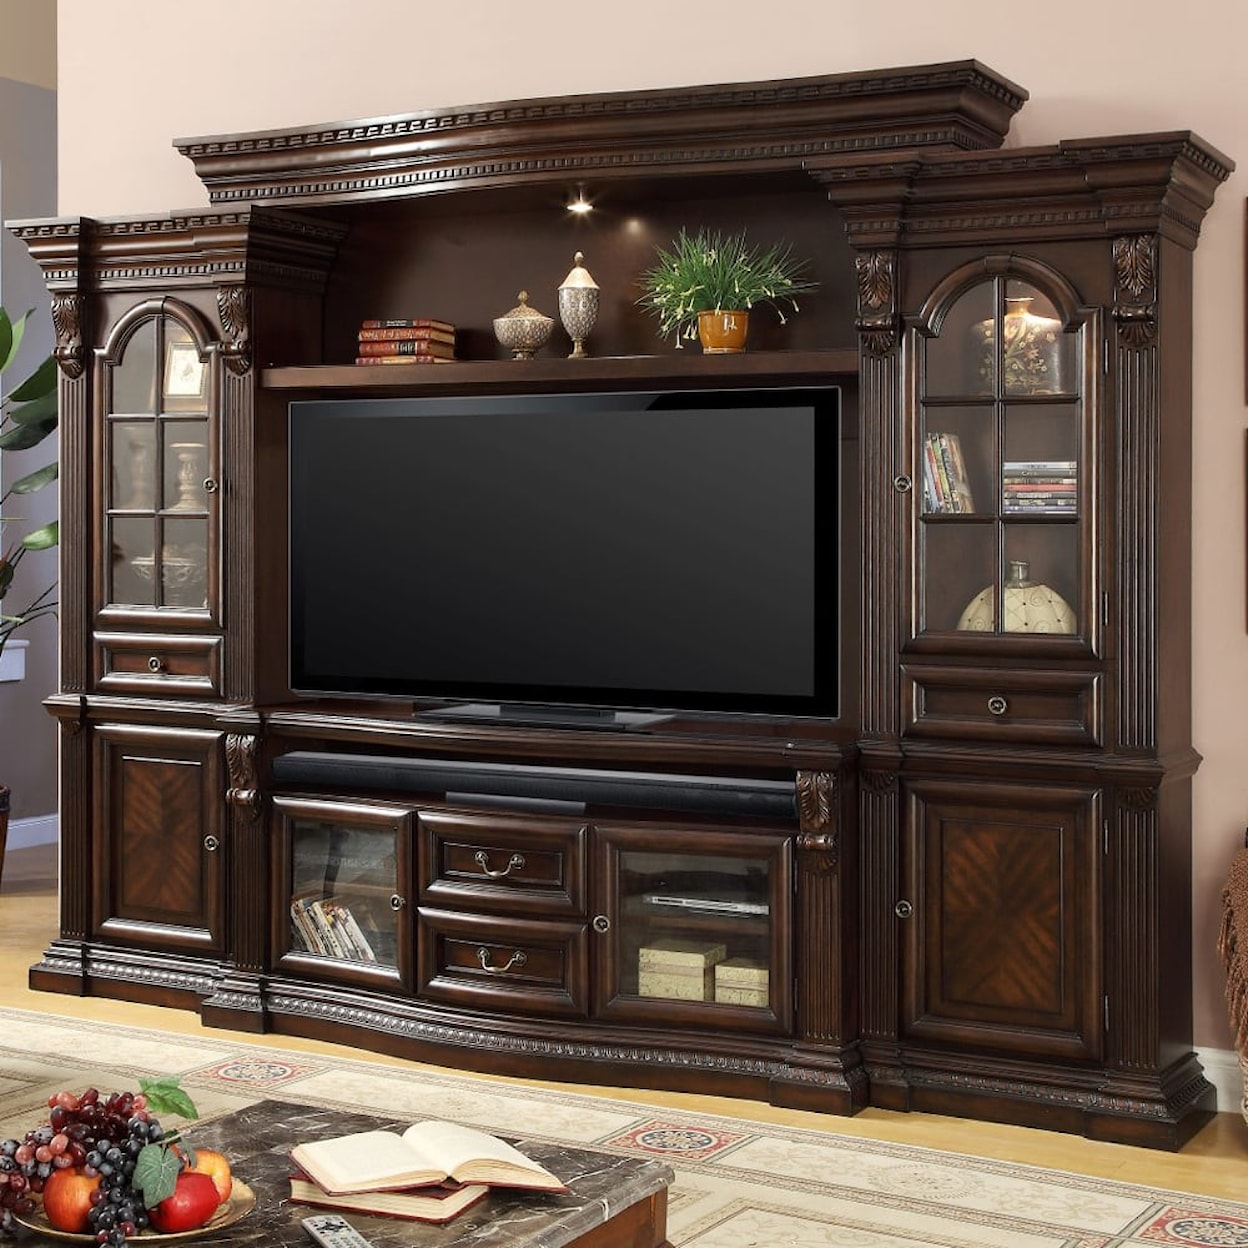 Paramount Furniture Bella Collection TV Console